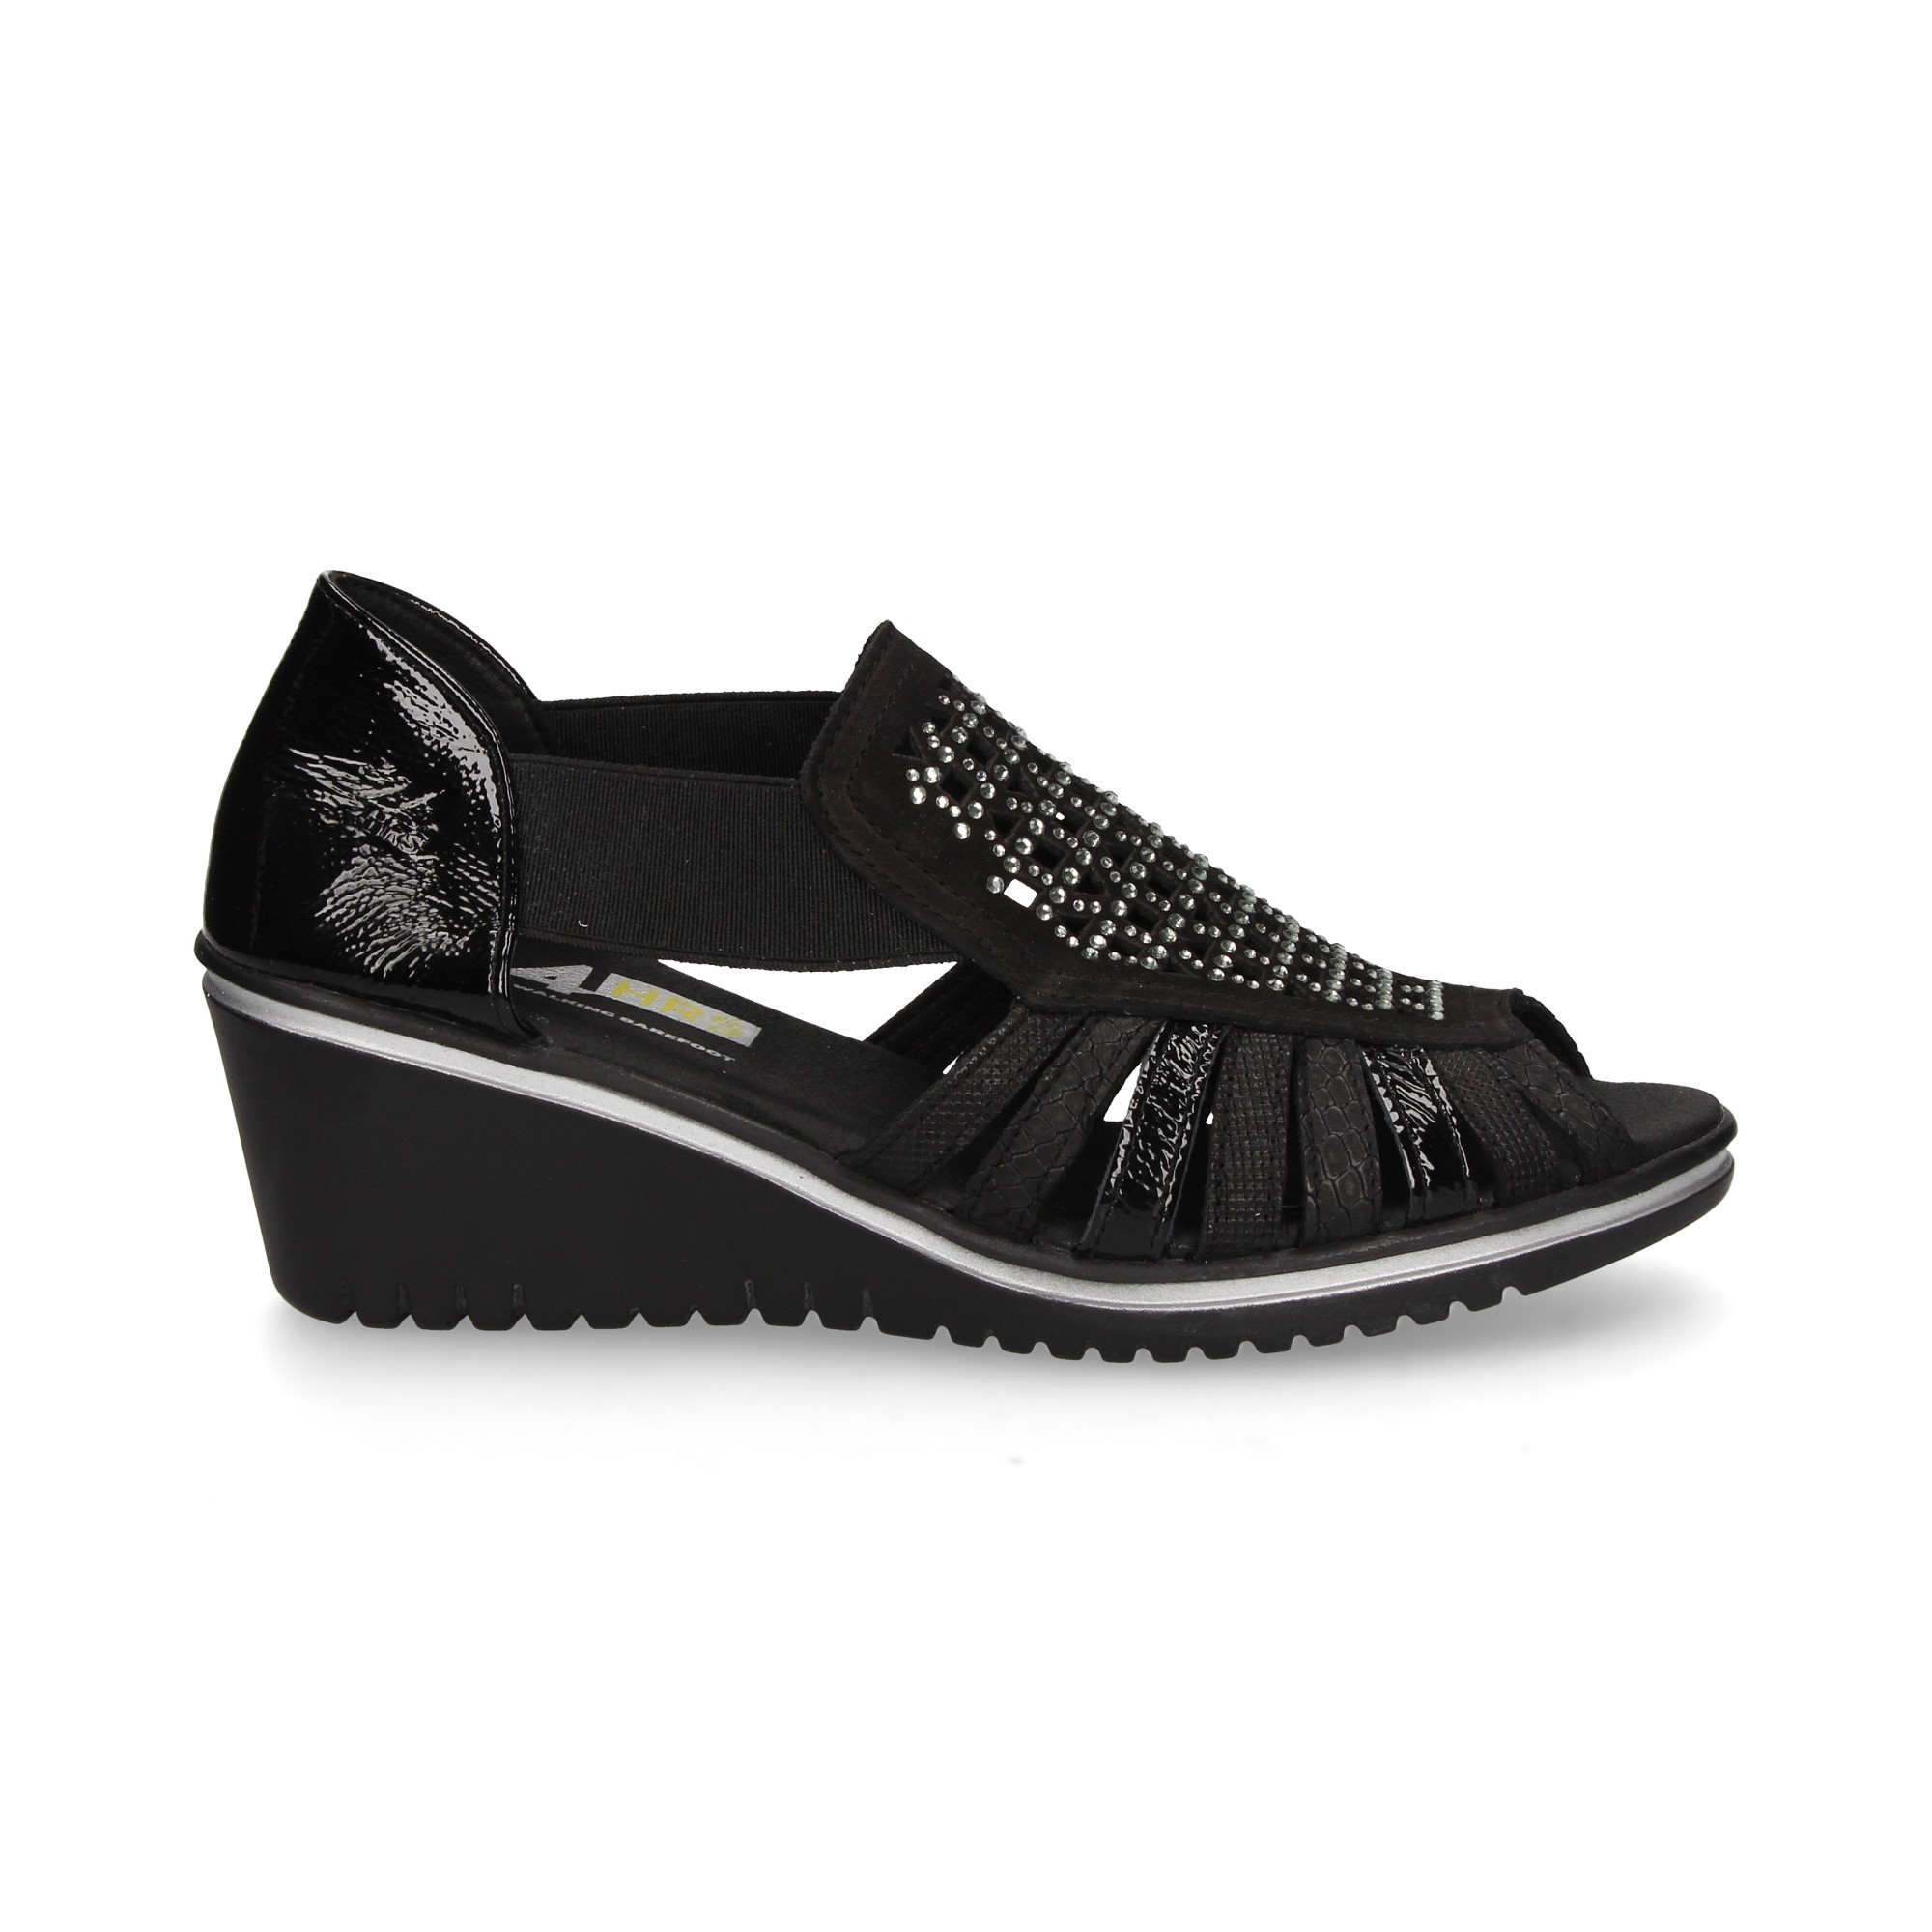 wedge-a-sides-instep-broth-black-strass